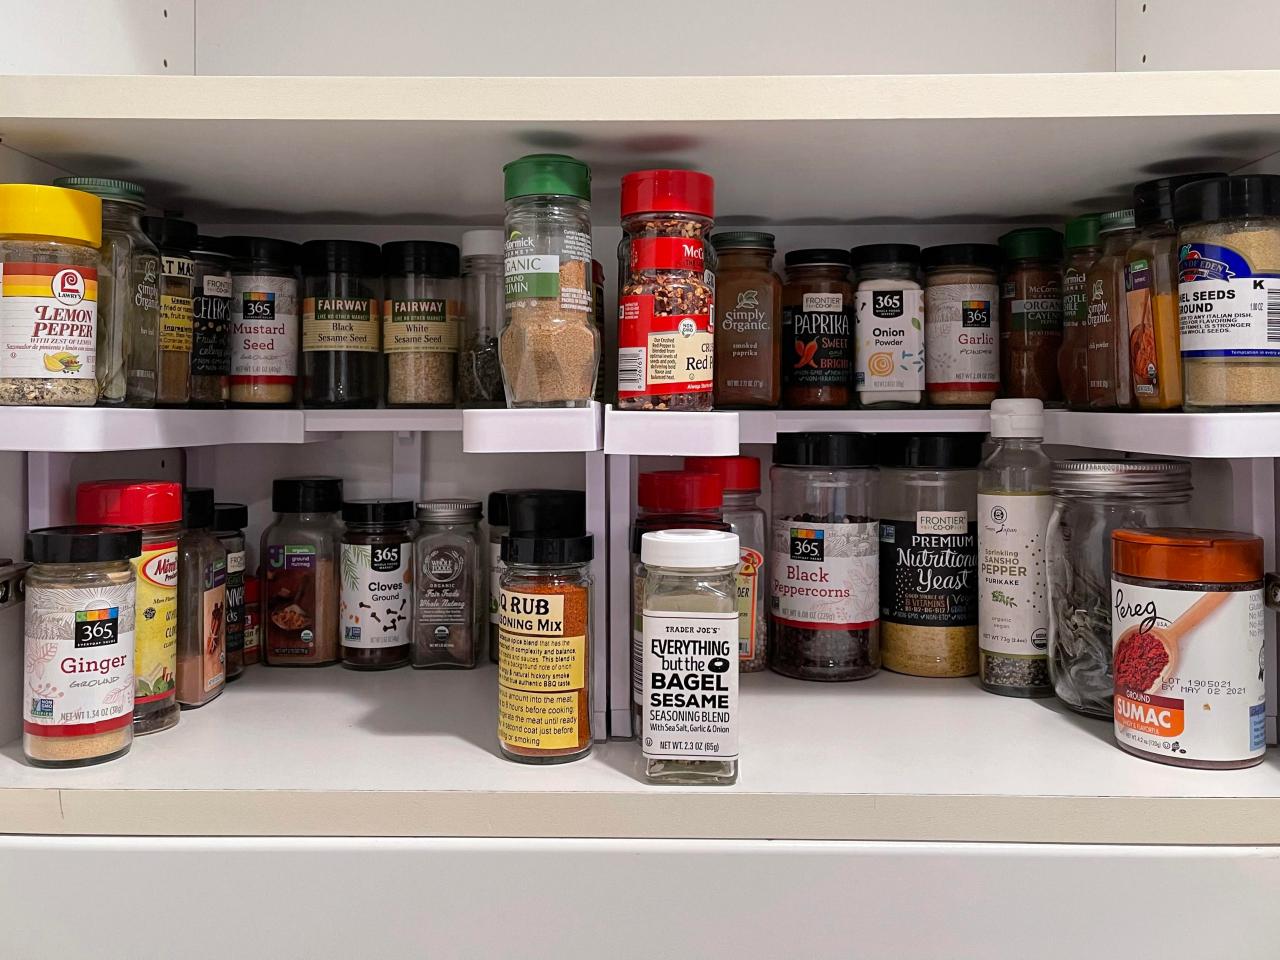 https://food.fnr.sndimg.com/content/dam/images/food/fullset/2021/04/05/spice-cabinet-organized-with-spicy-cainet-organizer.jpg.rend.hgtvcom.1280.960.suffix/1617644792904.jpeg